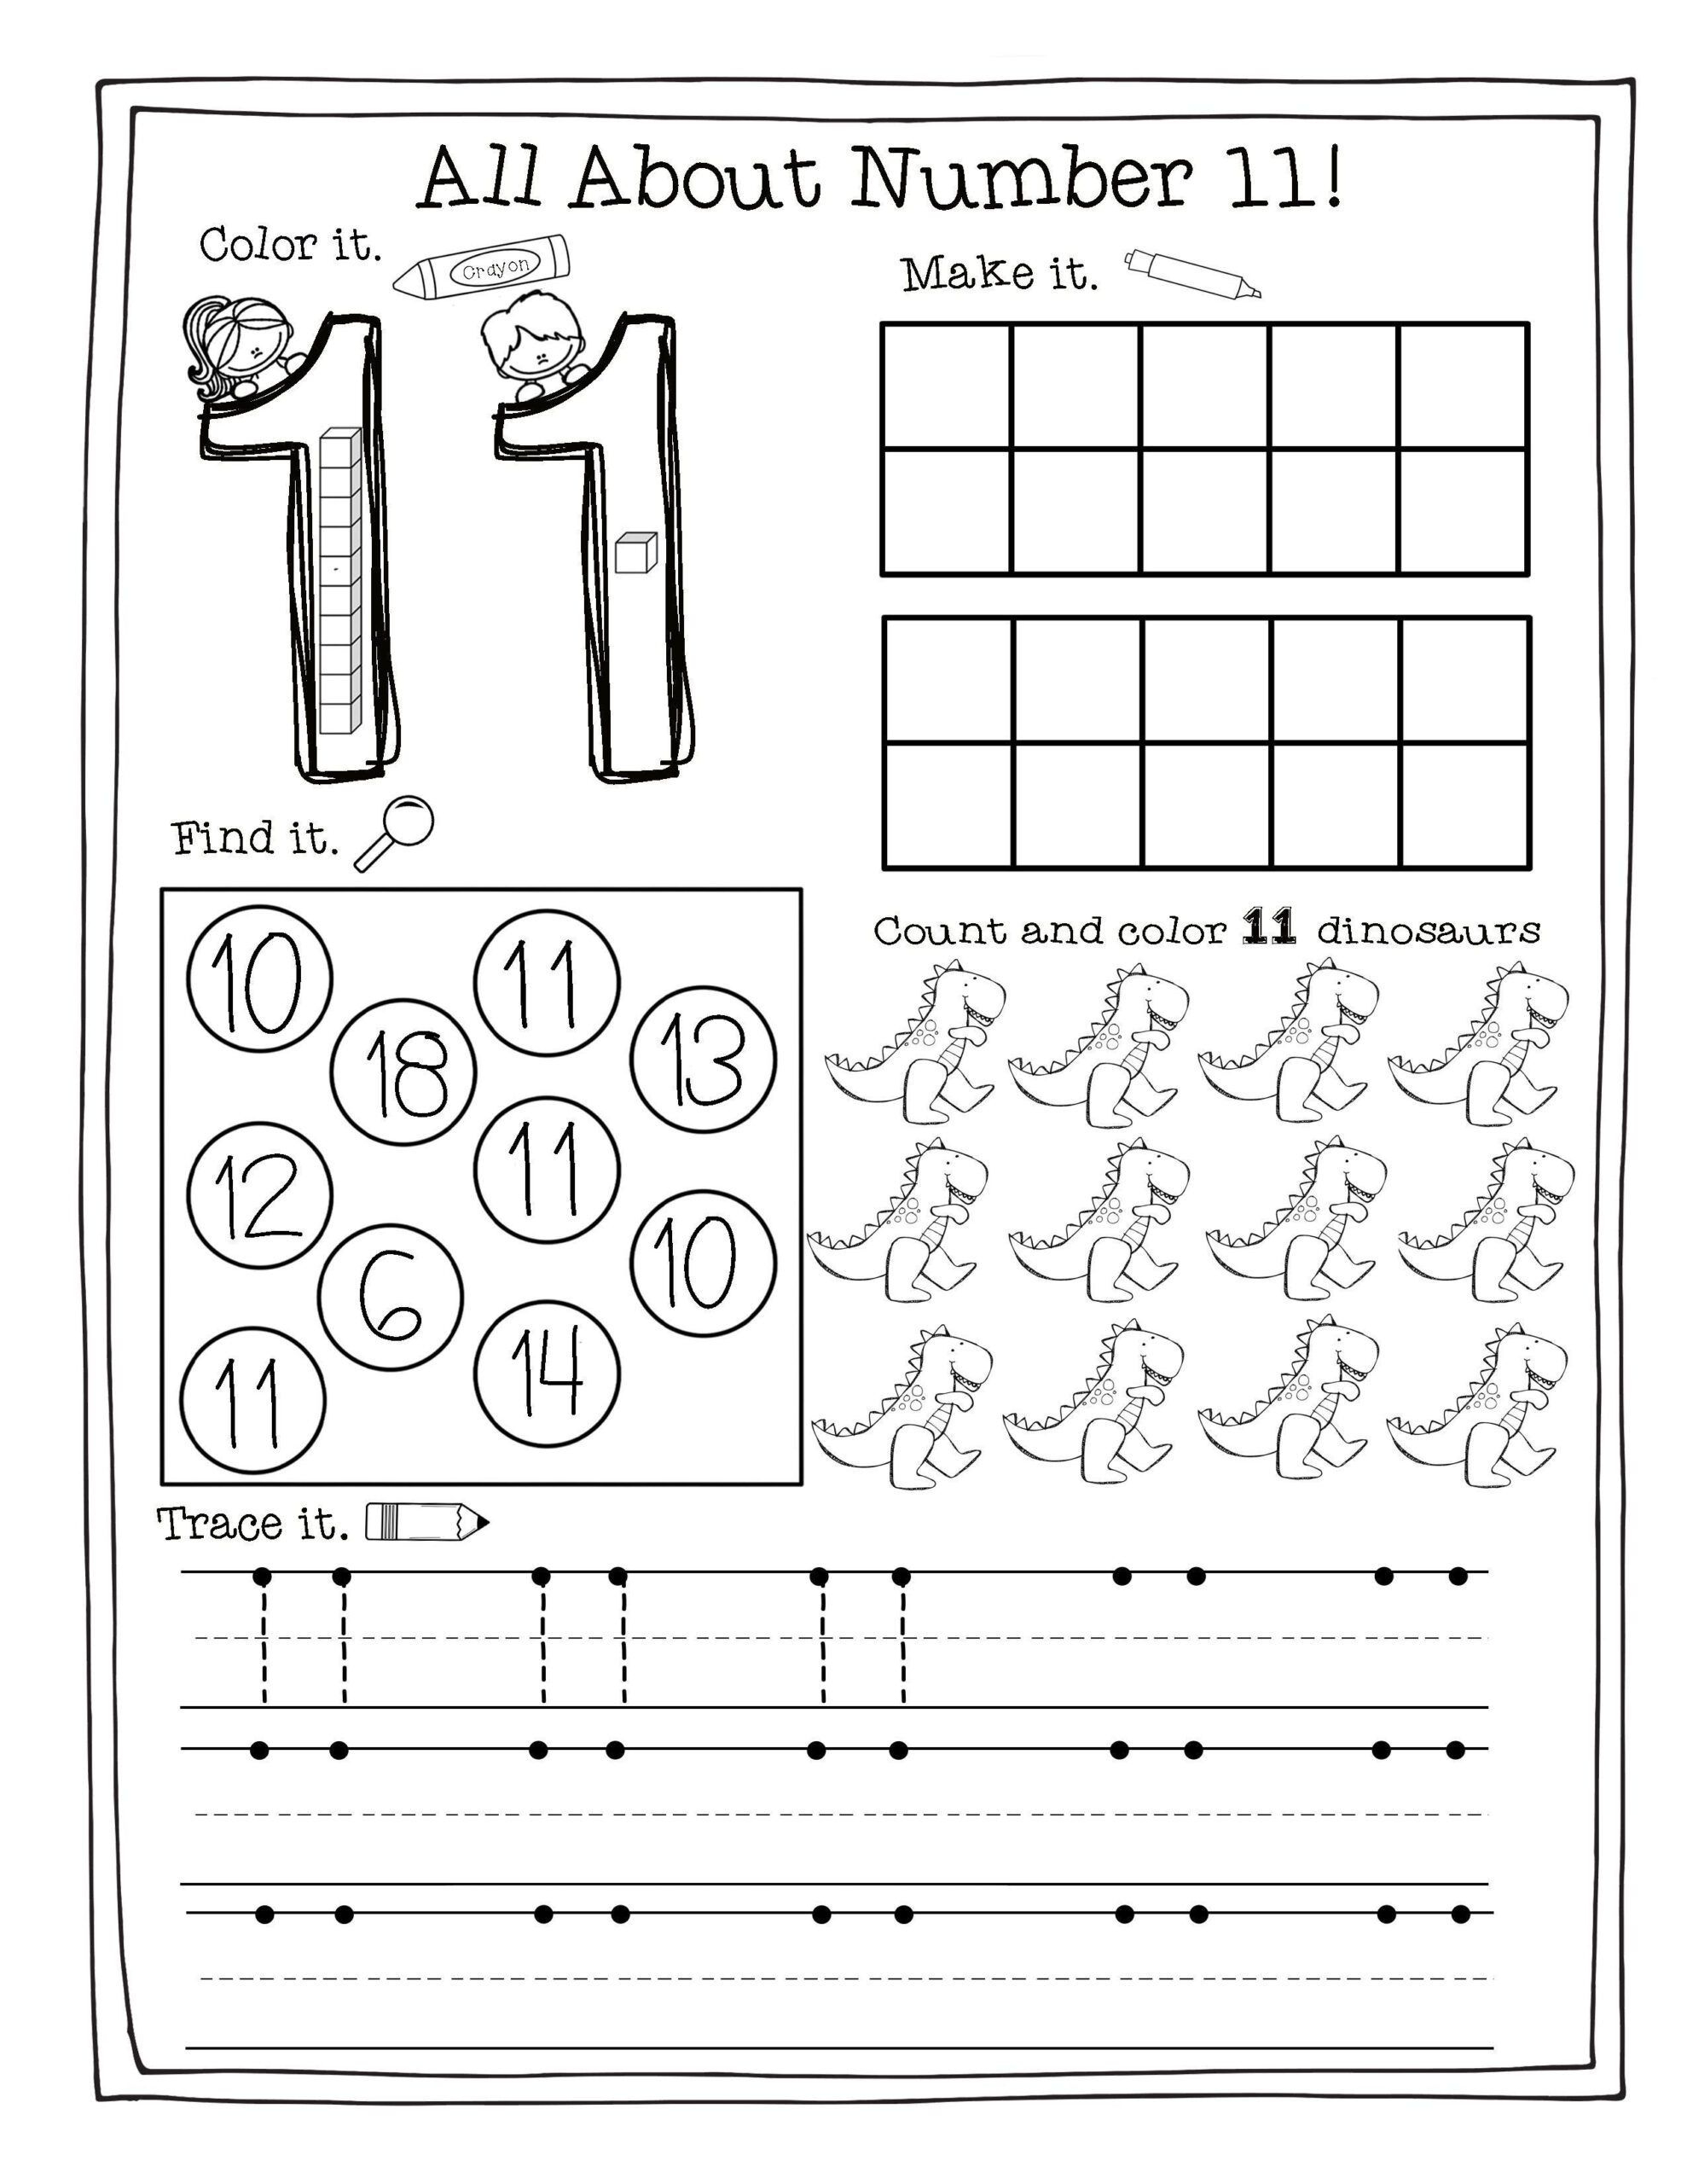 writing-numbers-worksheet-for-kids-101-activity-practice-writing